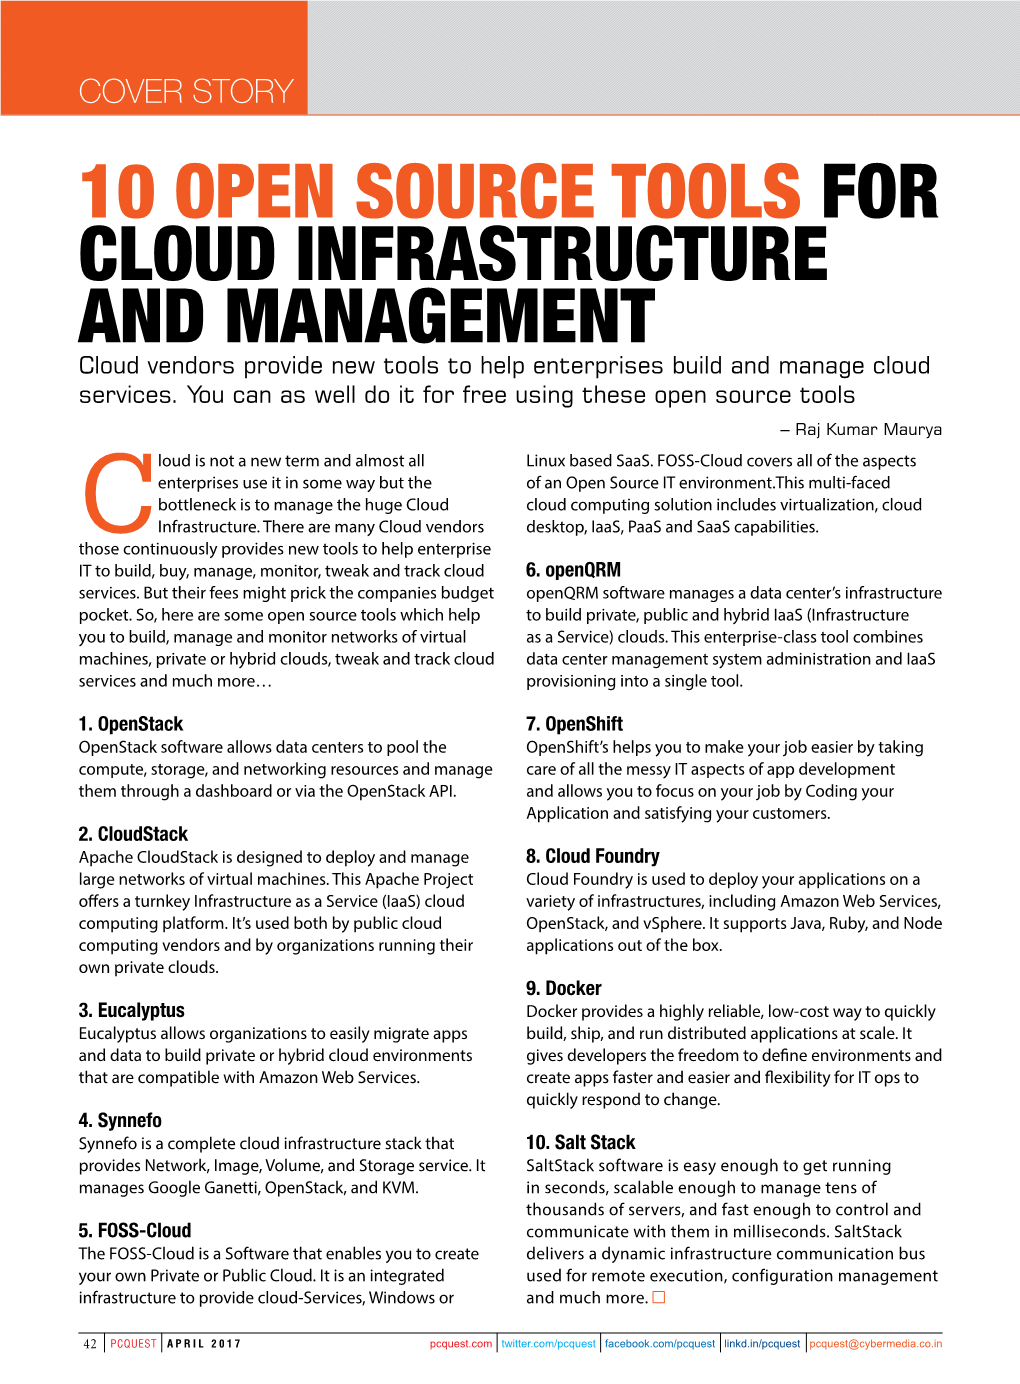 10 Open Source Tools for Cloud Infrastructure and Management Cloud Vendors Provide New Tools to Help Enterprises Build and Manage Cloud Services